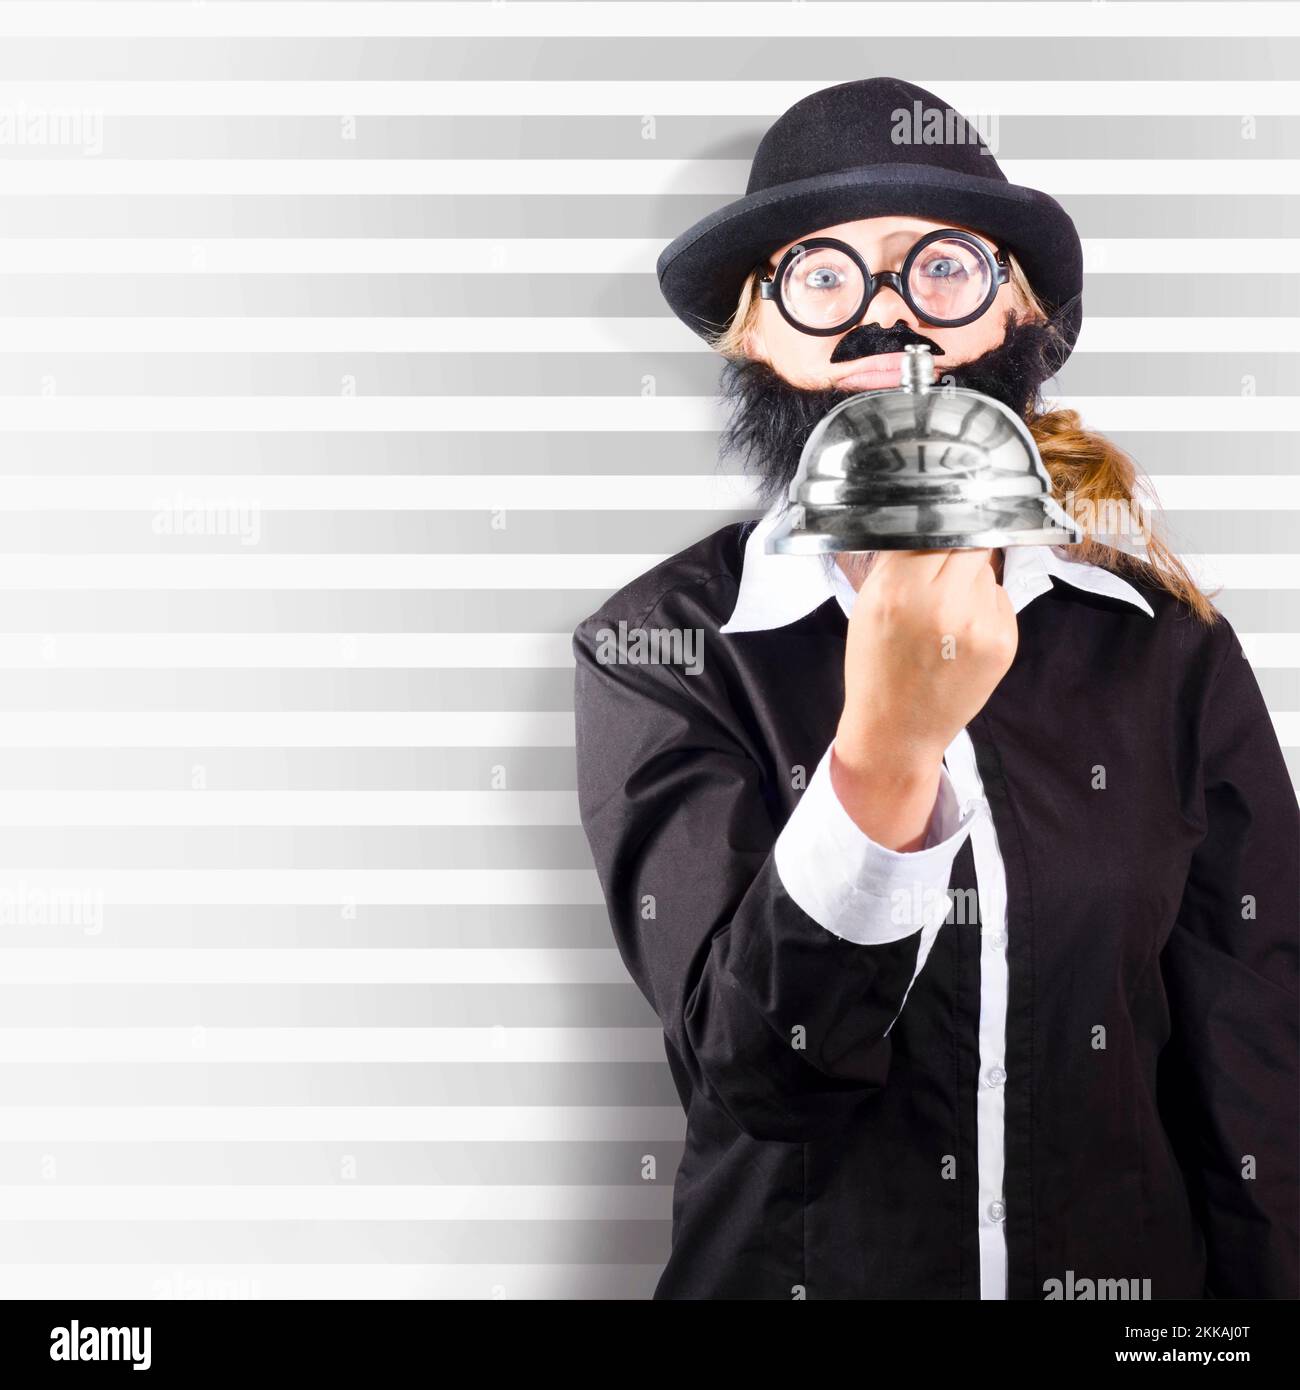 Square portrait of a comic business man holding large customer service bell on striped background Stock Photo